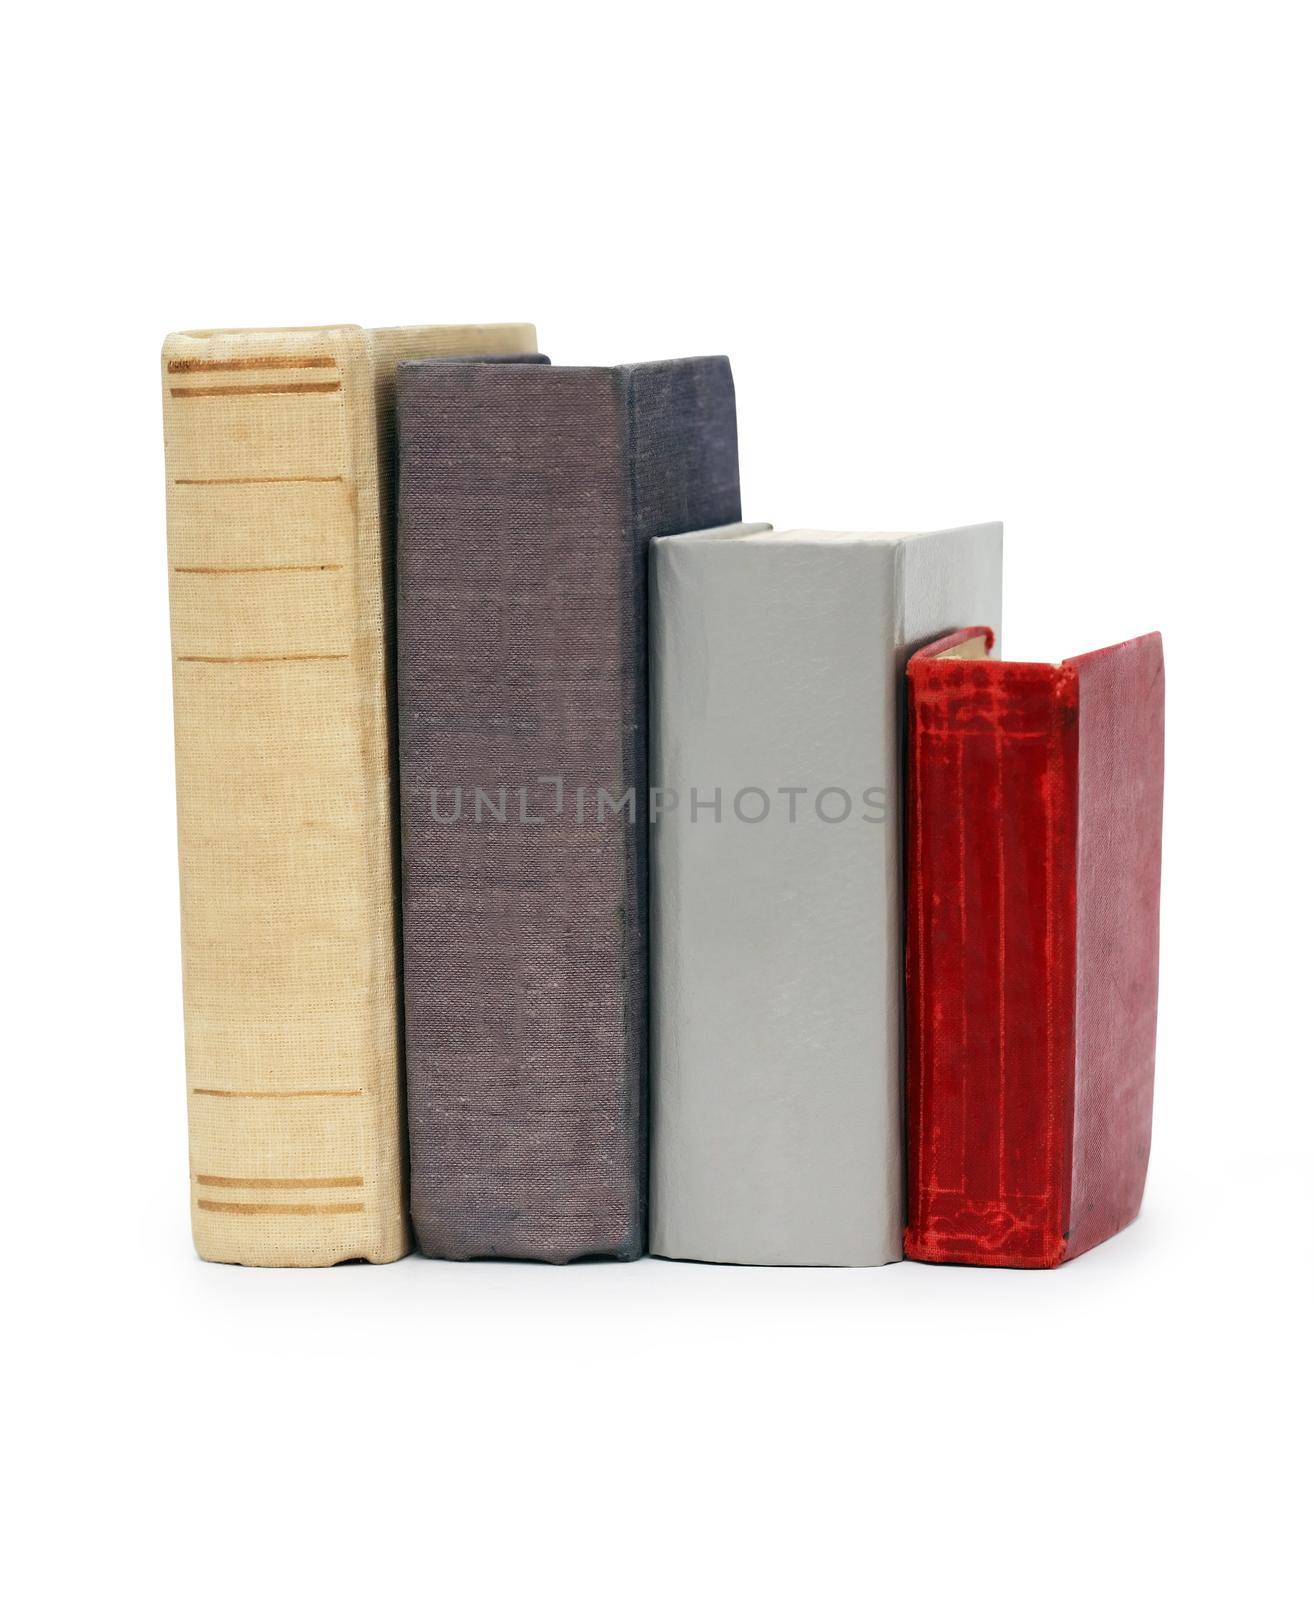 Few old books in a row isolated on white background with clipping path